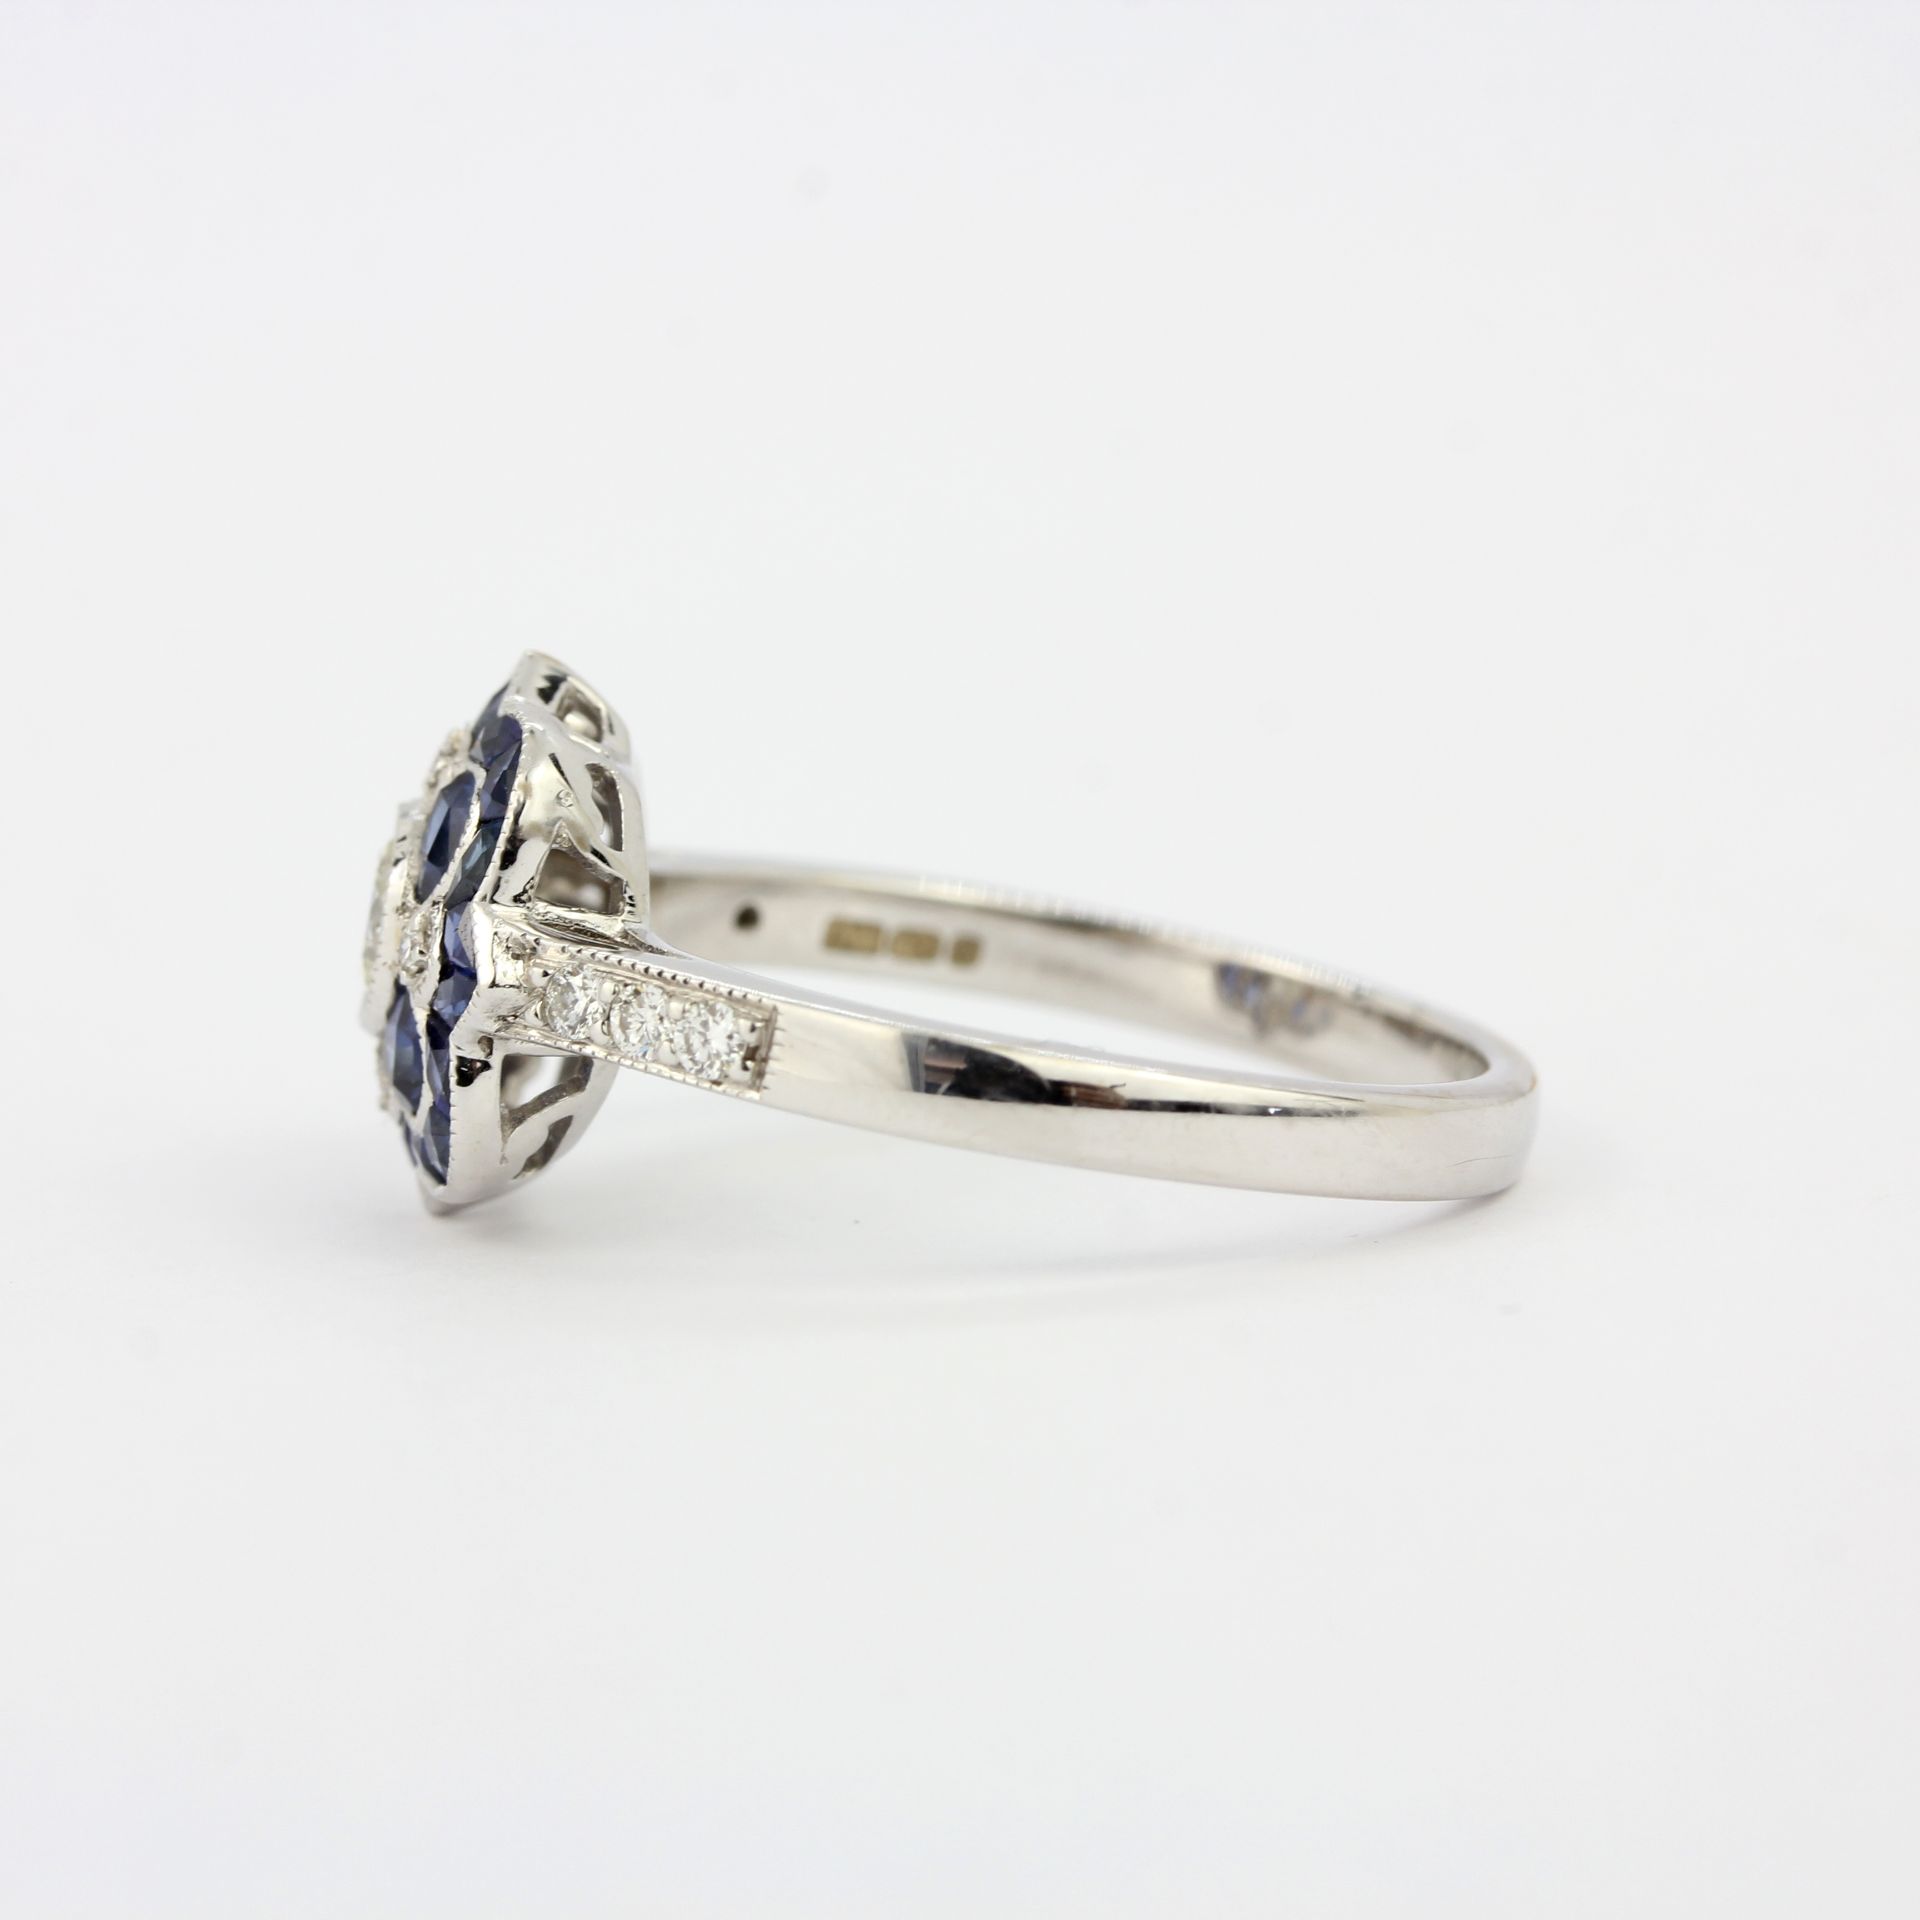 An 18ct white gold Art Deco style ring set with fancy cut sapphires and diamonds, ring size P. - Image 3 of 3